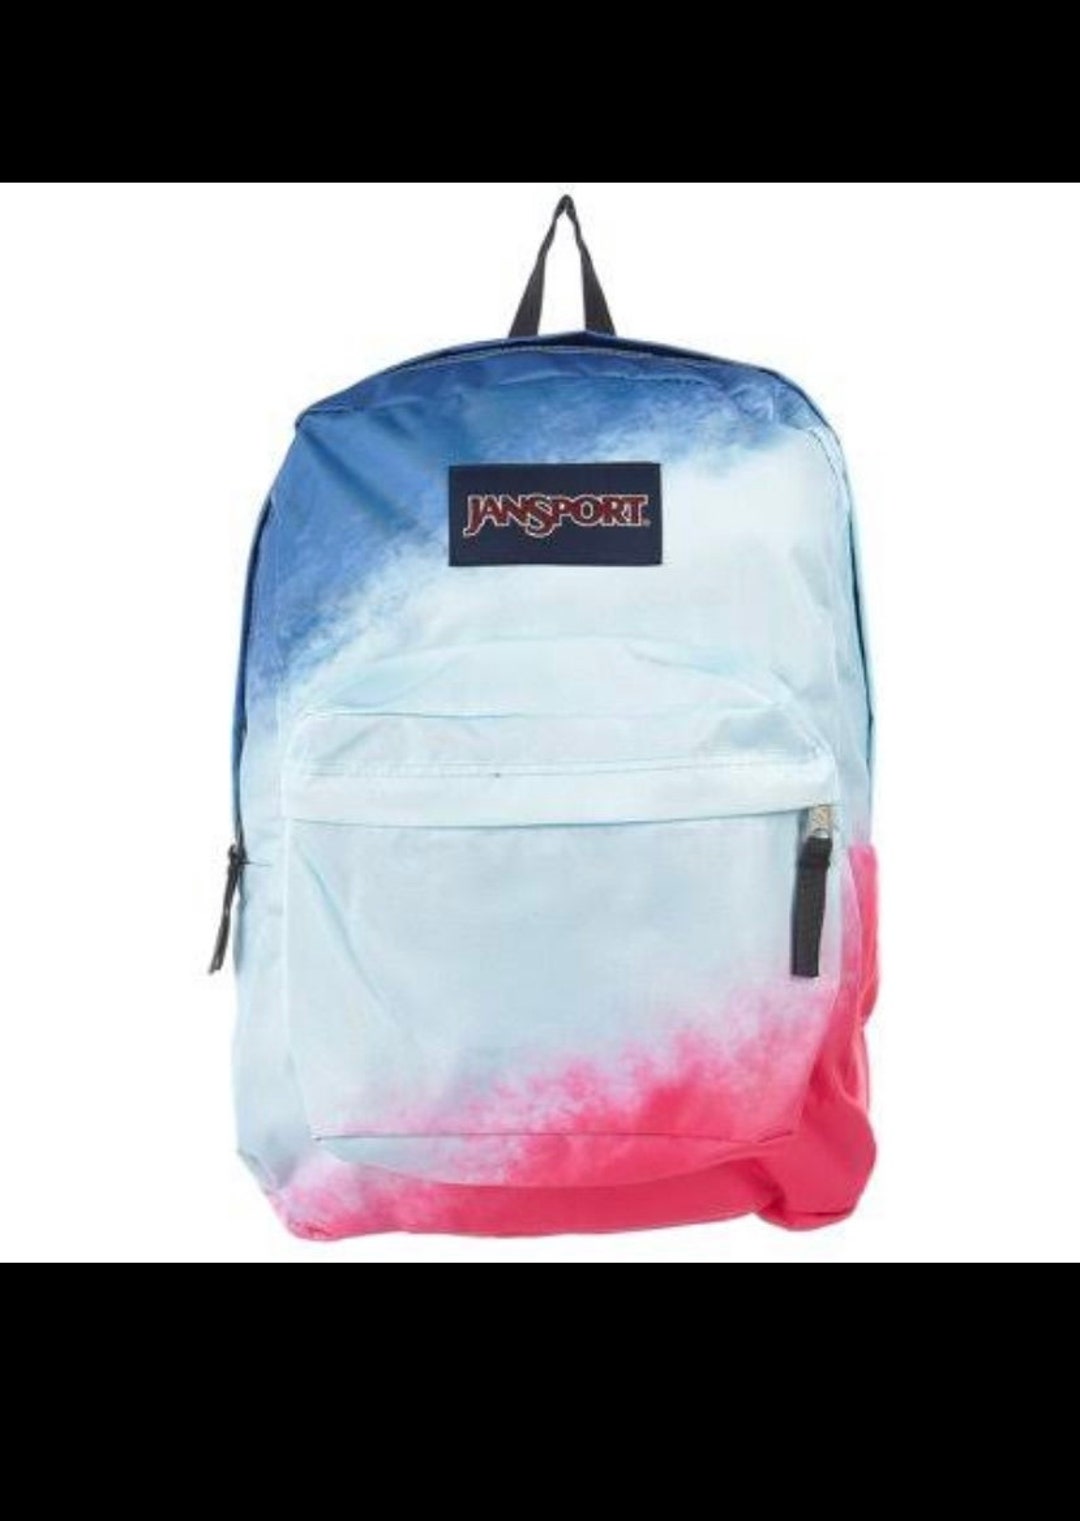 JanSport Giant Promotional Backpack - Never Used Store Display - EXTREMELY  RARE